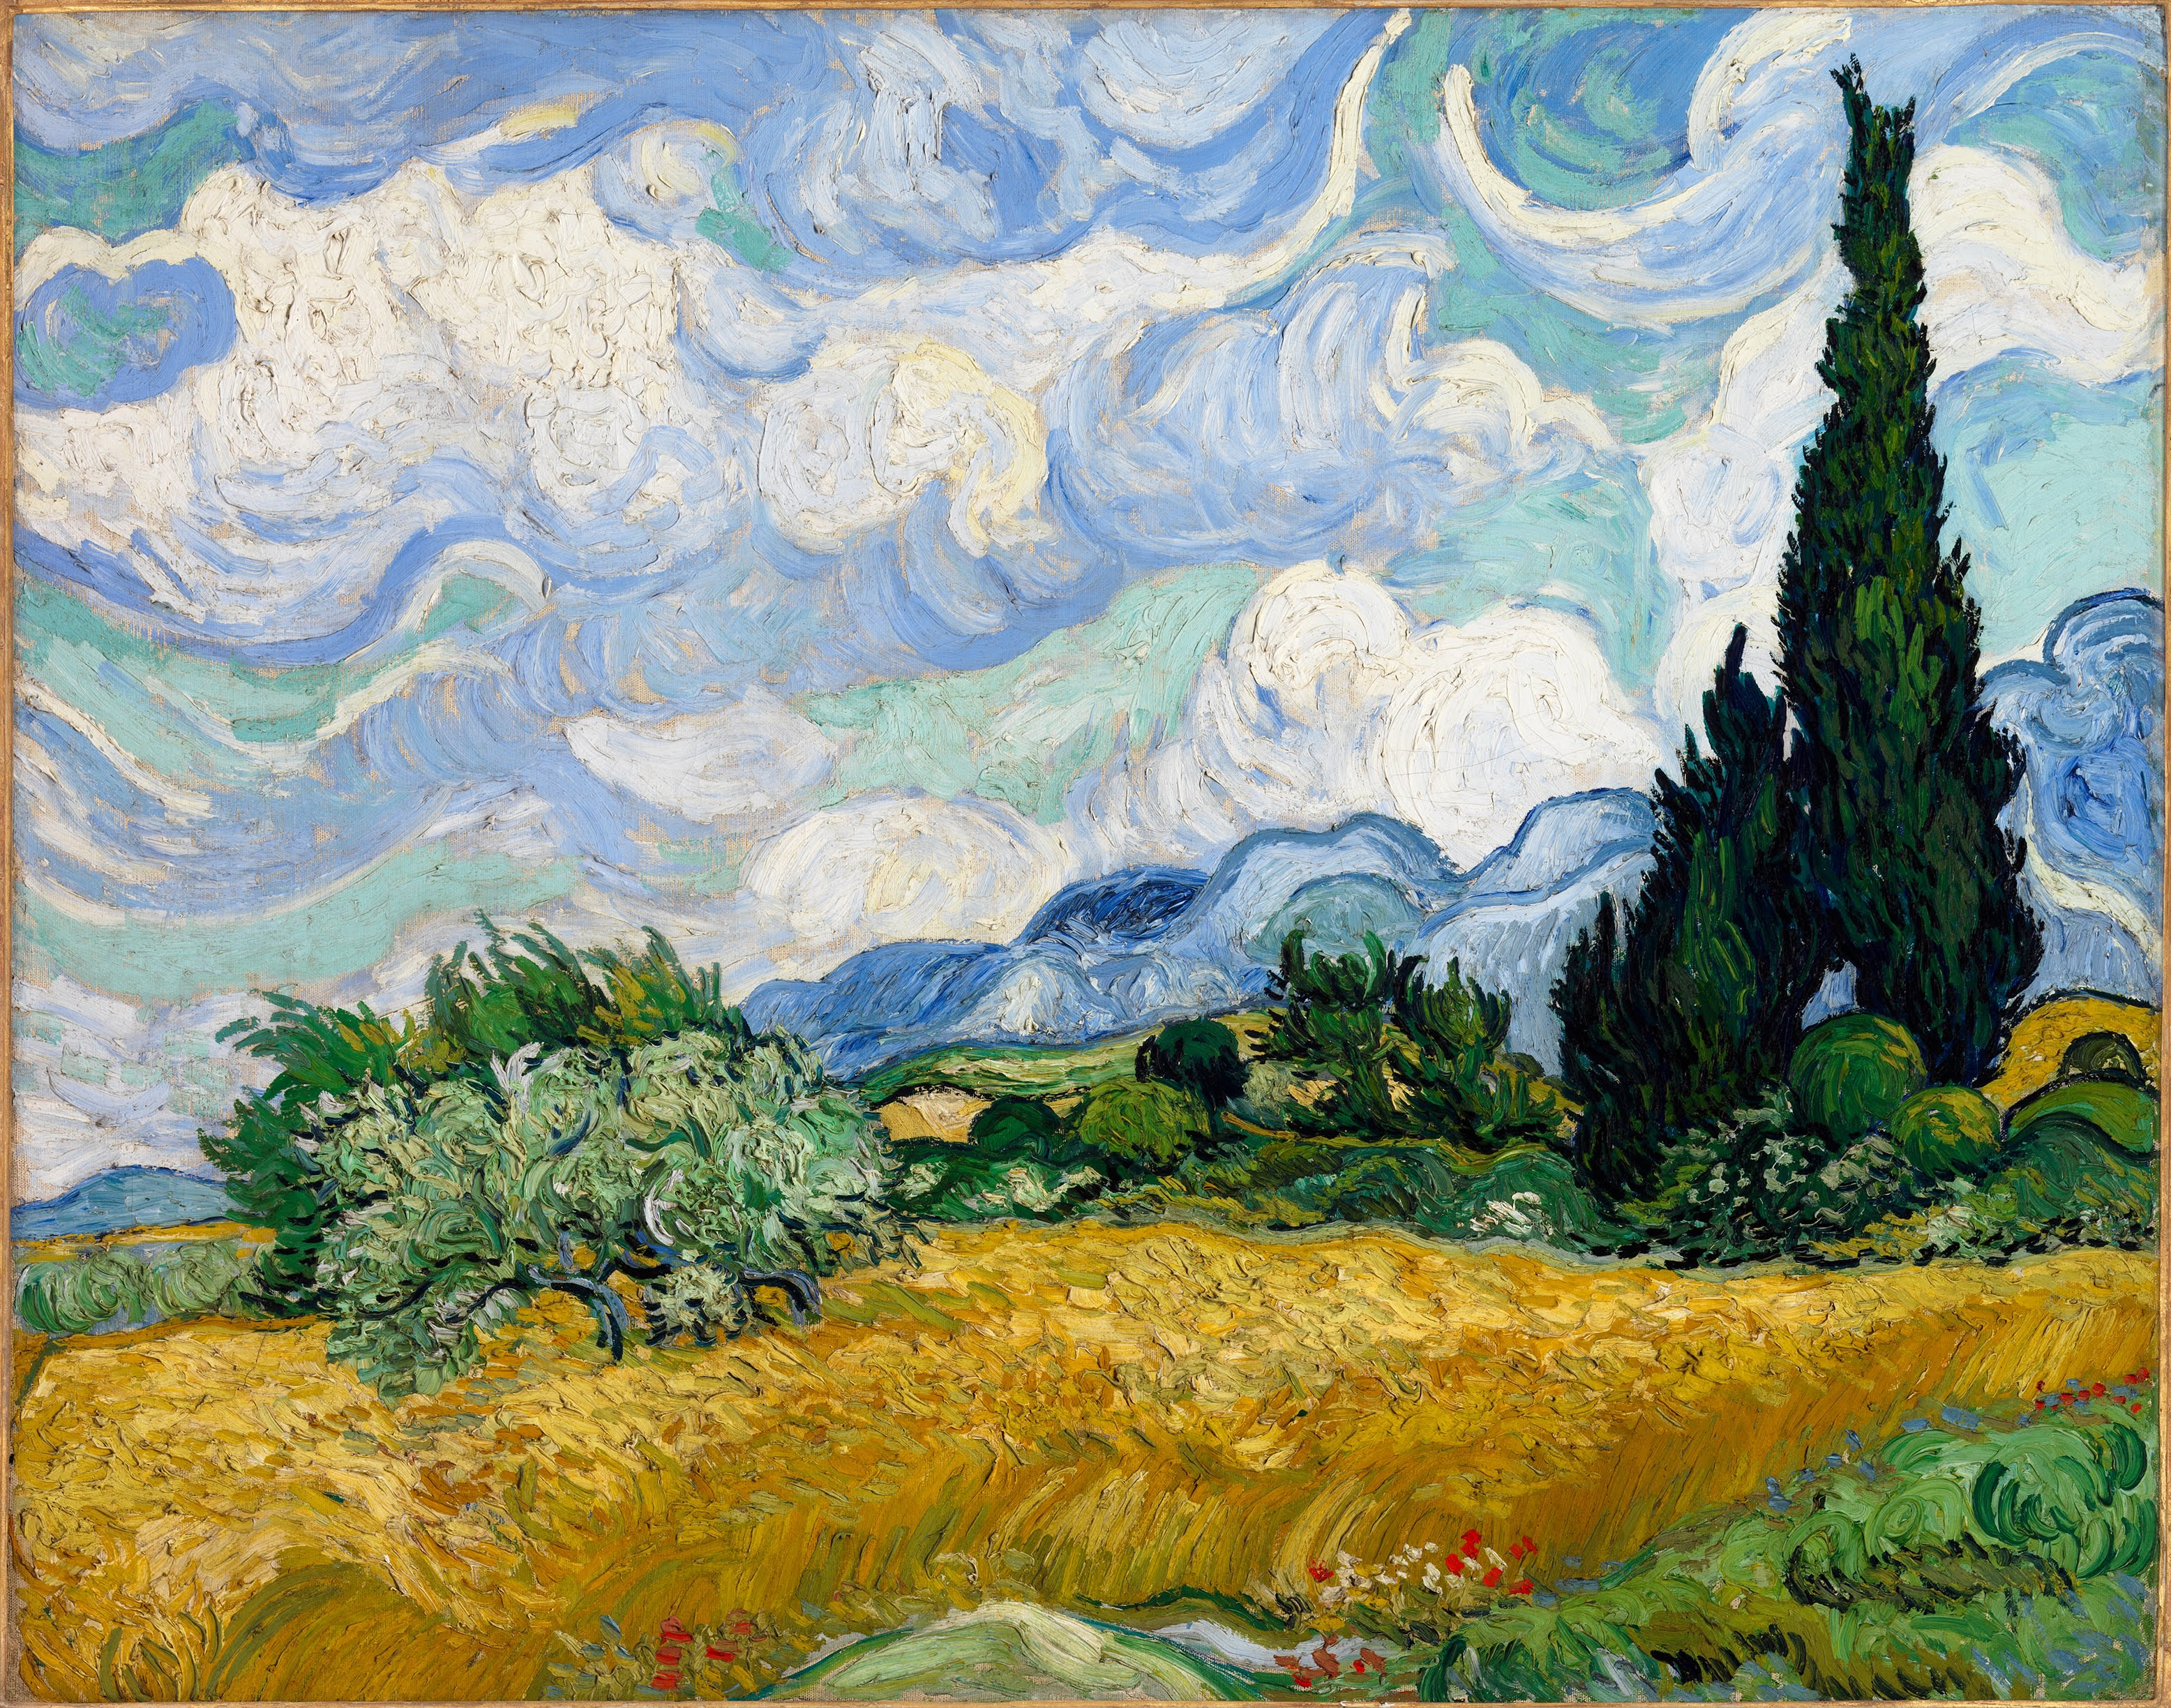 Wheat Field with Cypresses, Vincent van Gogh, 1889